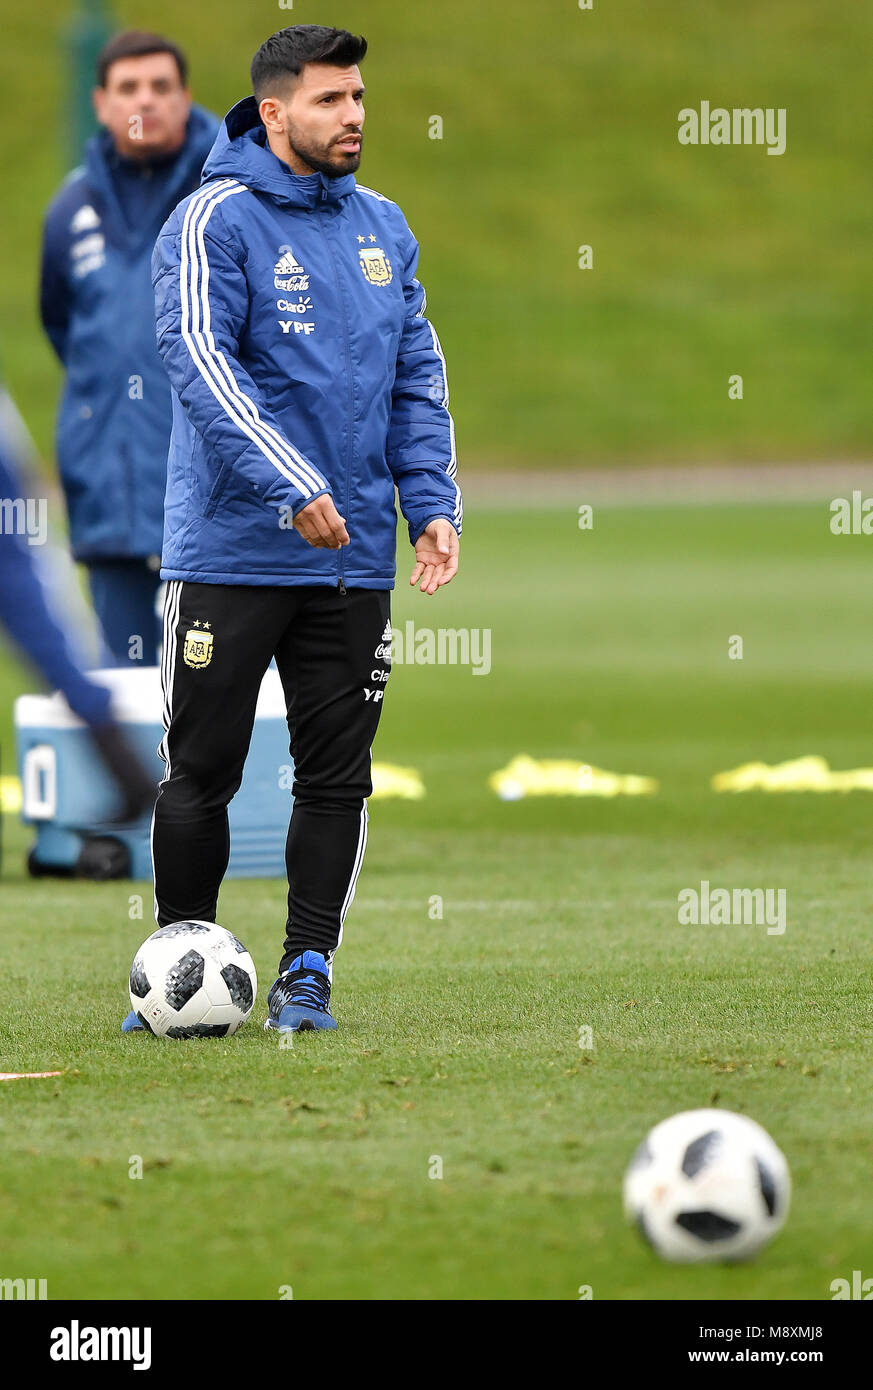 Argentina's Sergio Aguero during a training session at the City Football Academy, Manchester. Stock Photo